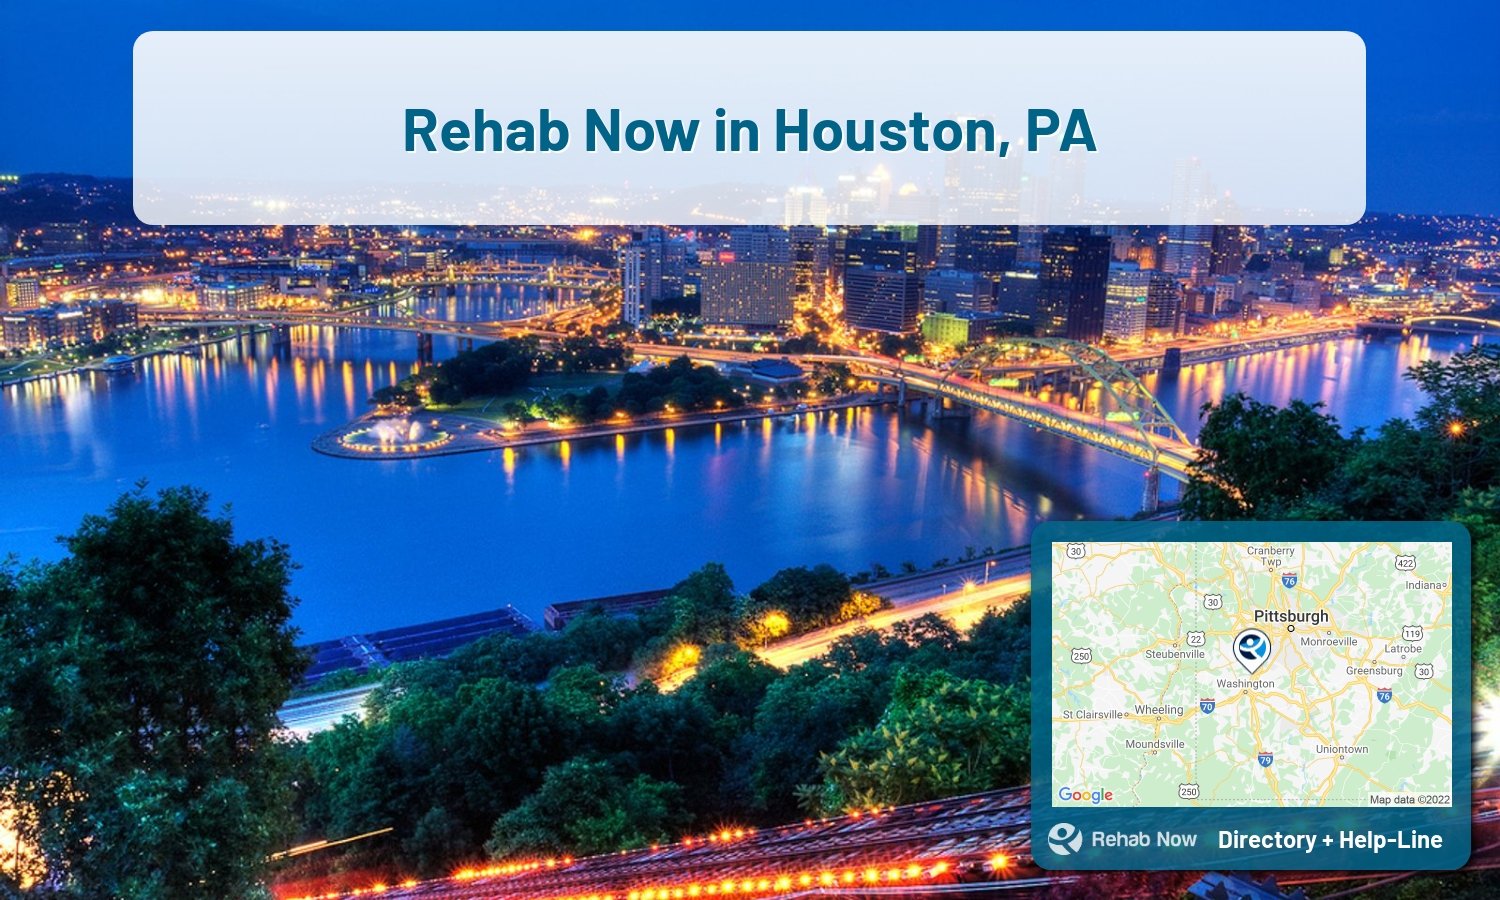 Drug rehab and alcohol treatment services nearby Houston, PA. Need help choosing a treatment program? Call our free hotline!